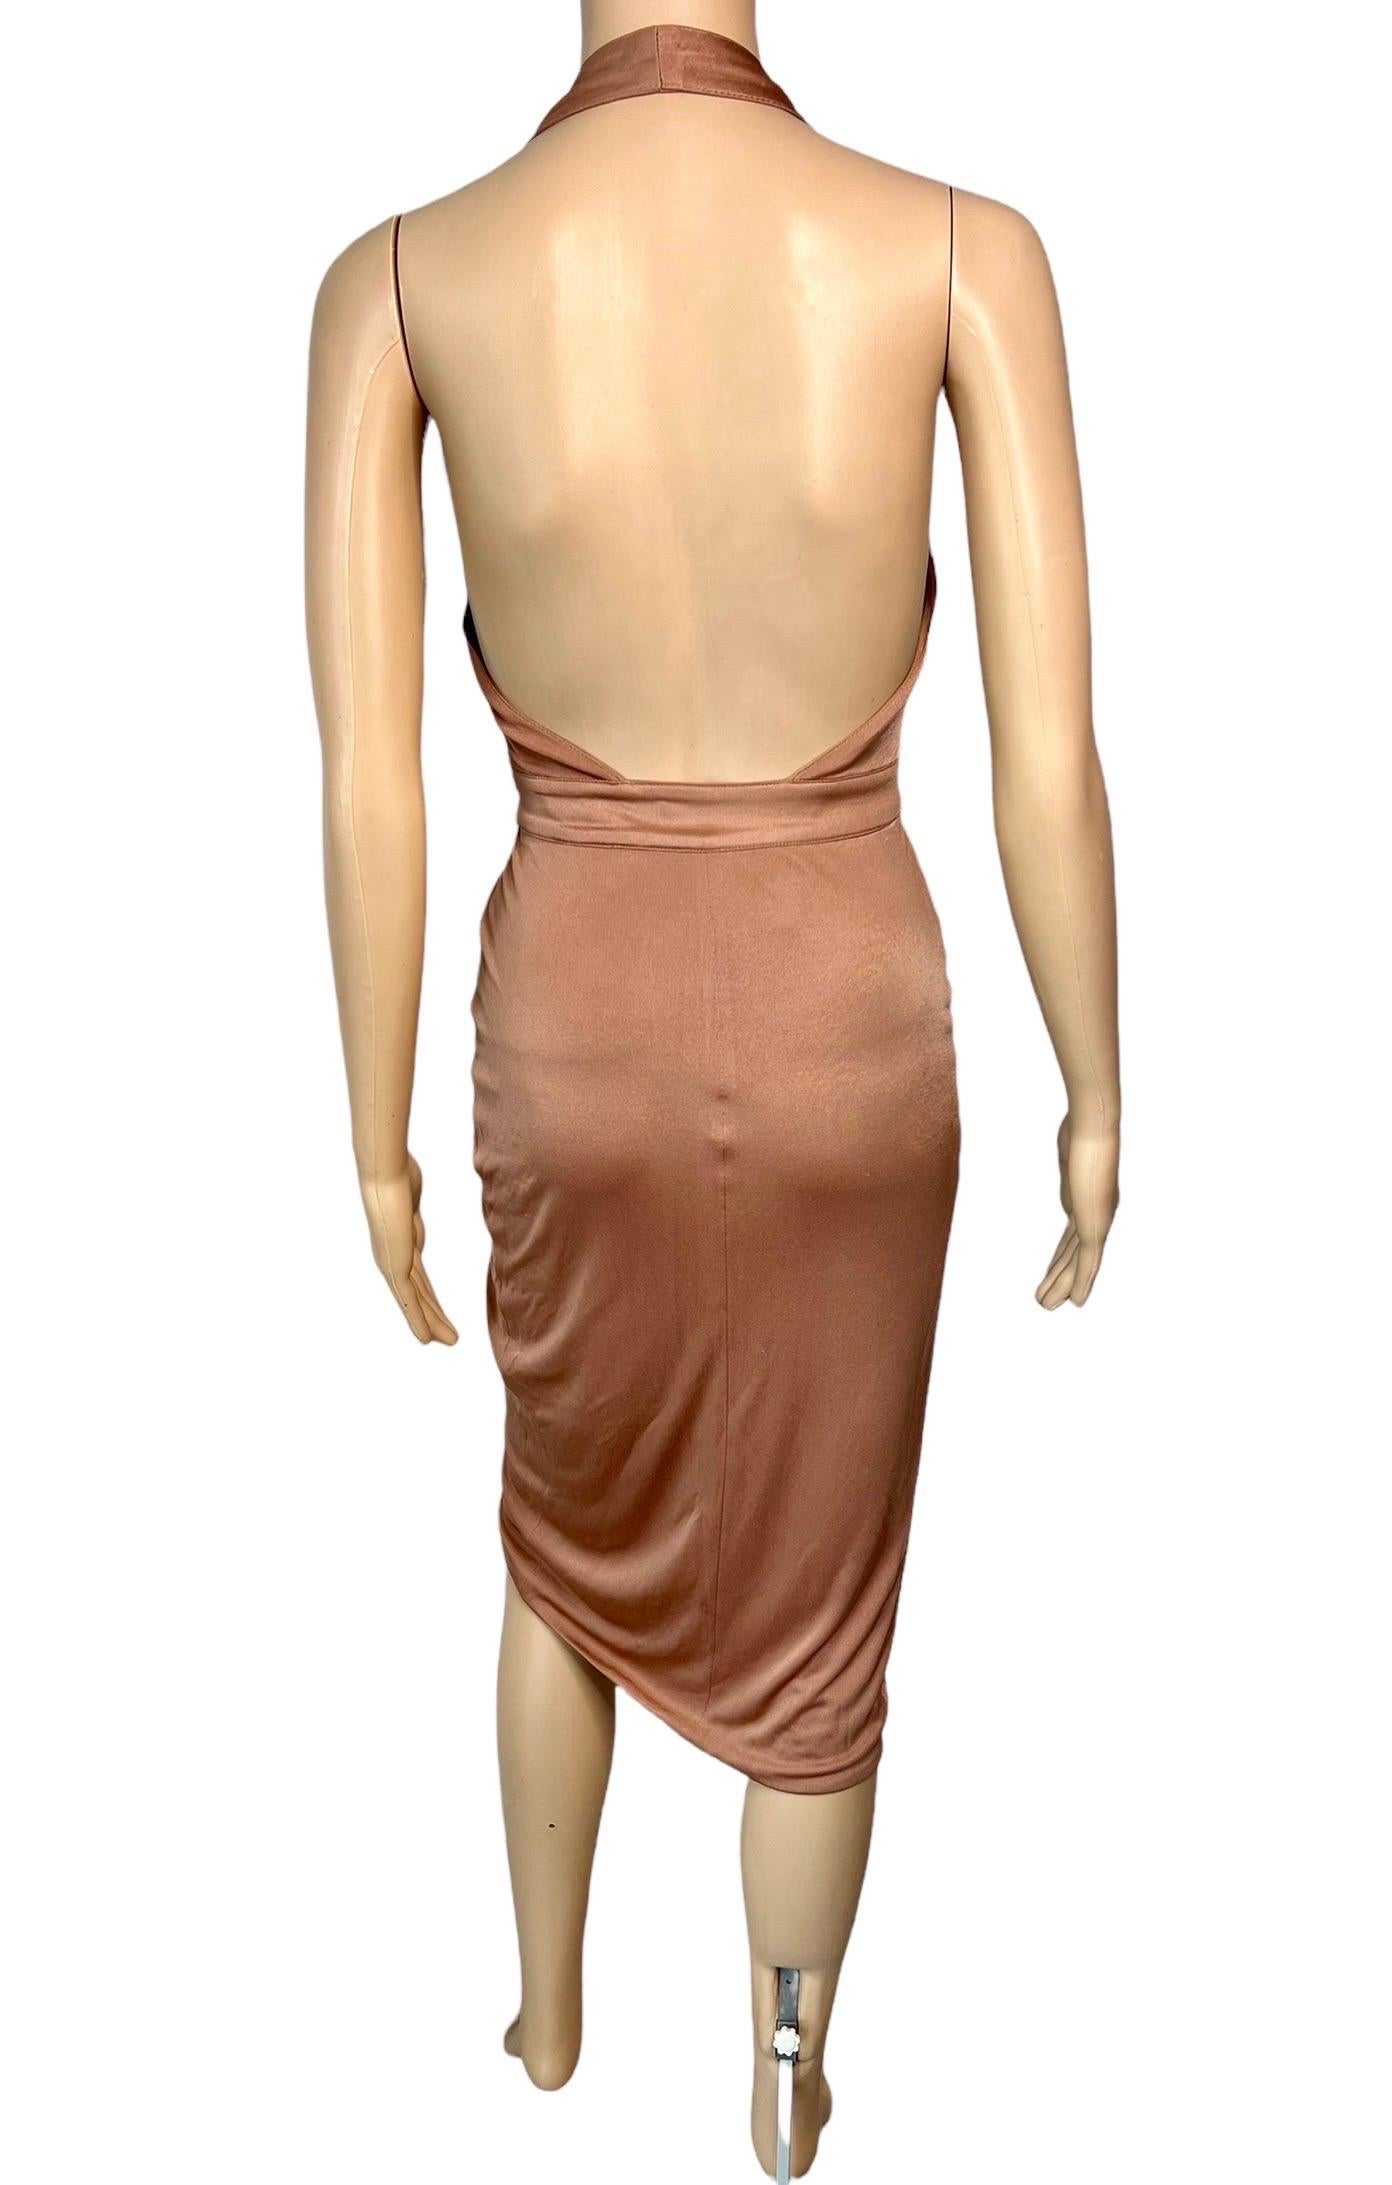 Versace S/S 2005 Runway Logo Belt Plunging Backless Wrap Dress IT 38

Look 8 from the Spring 2005 Collection.
